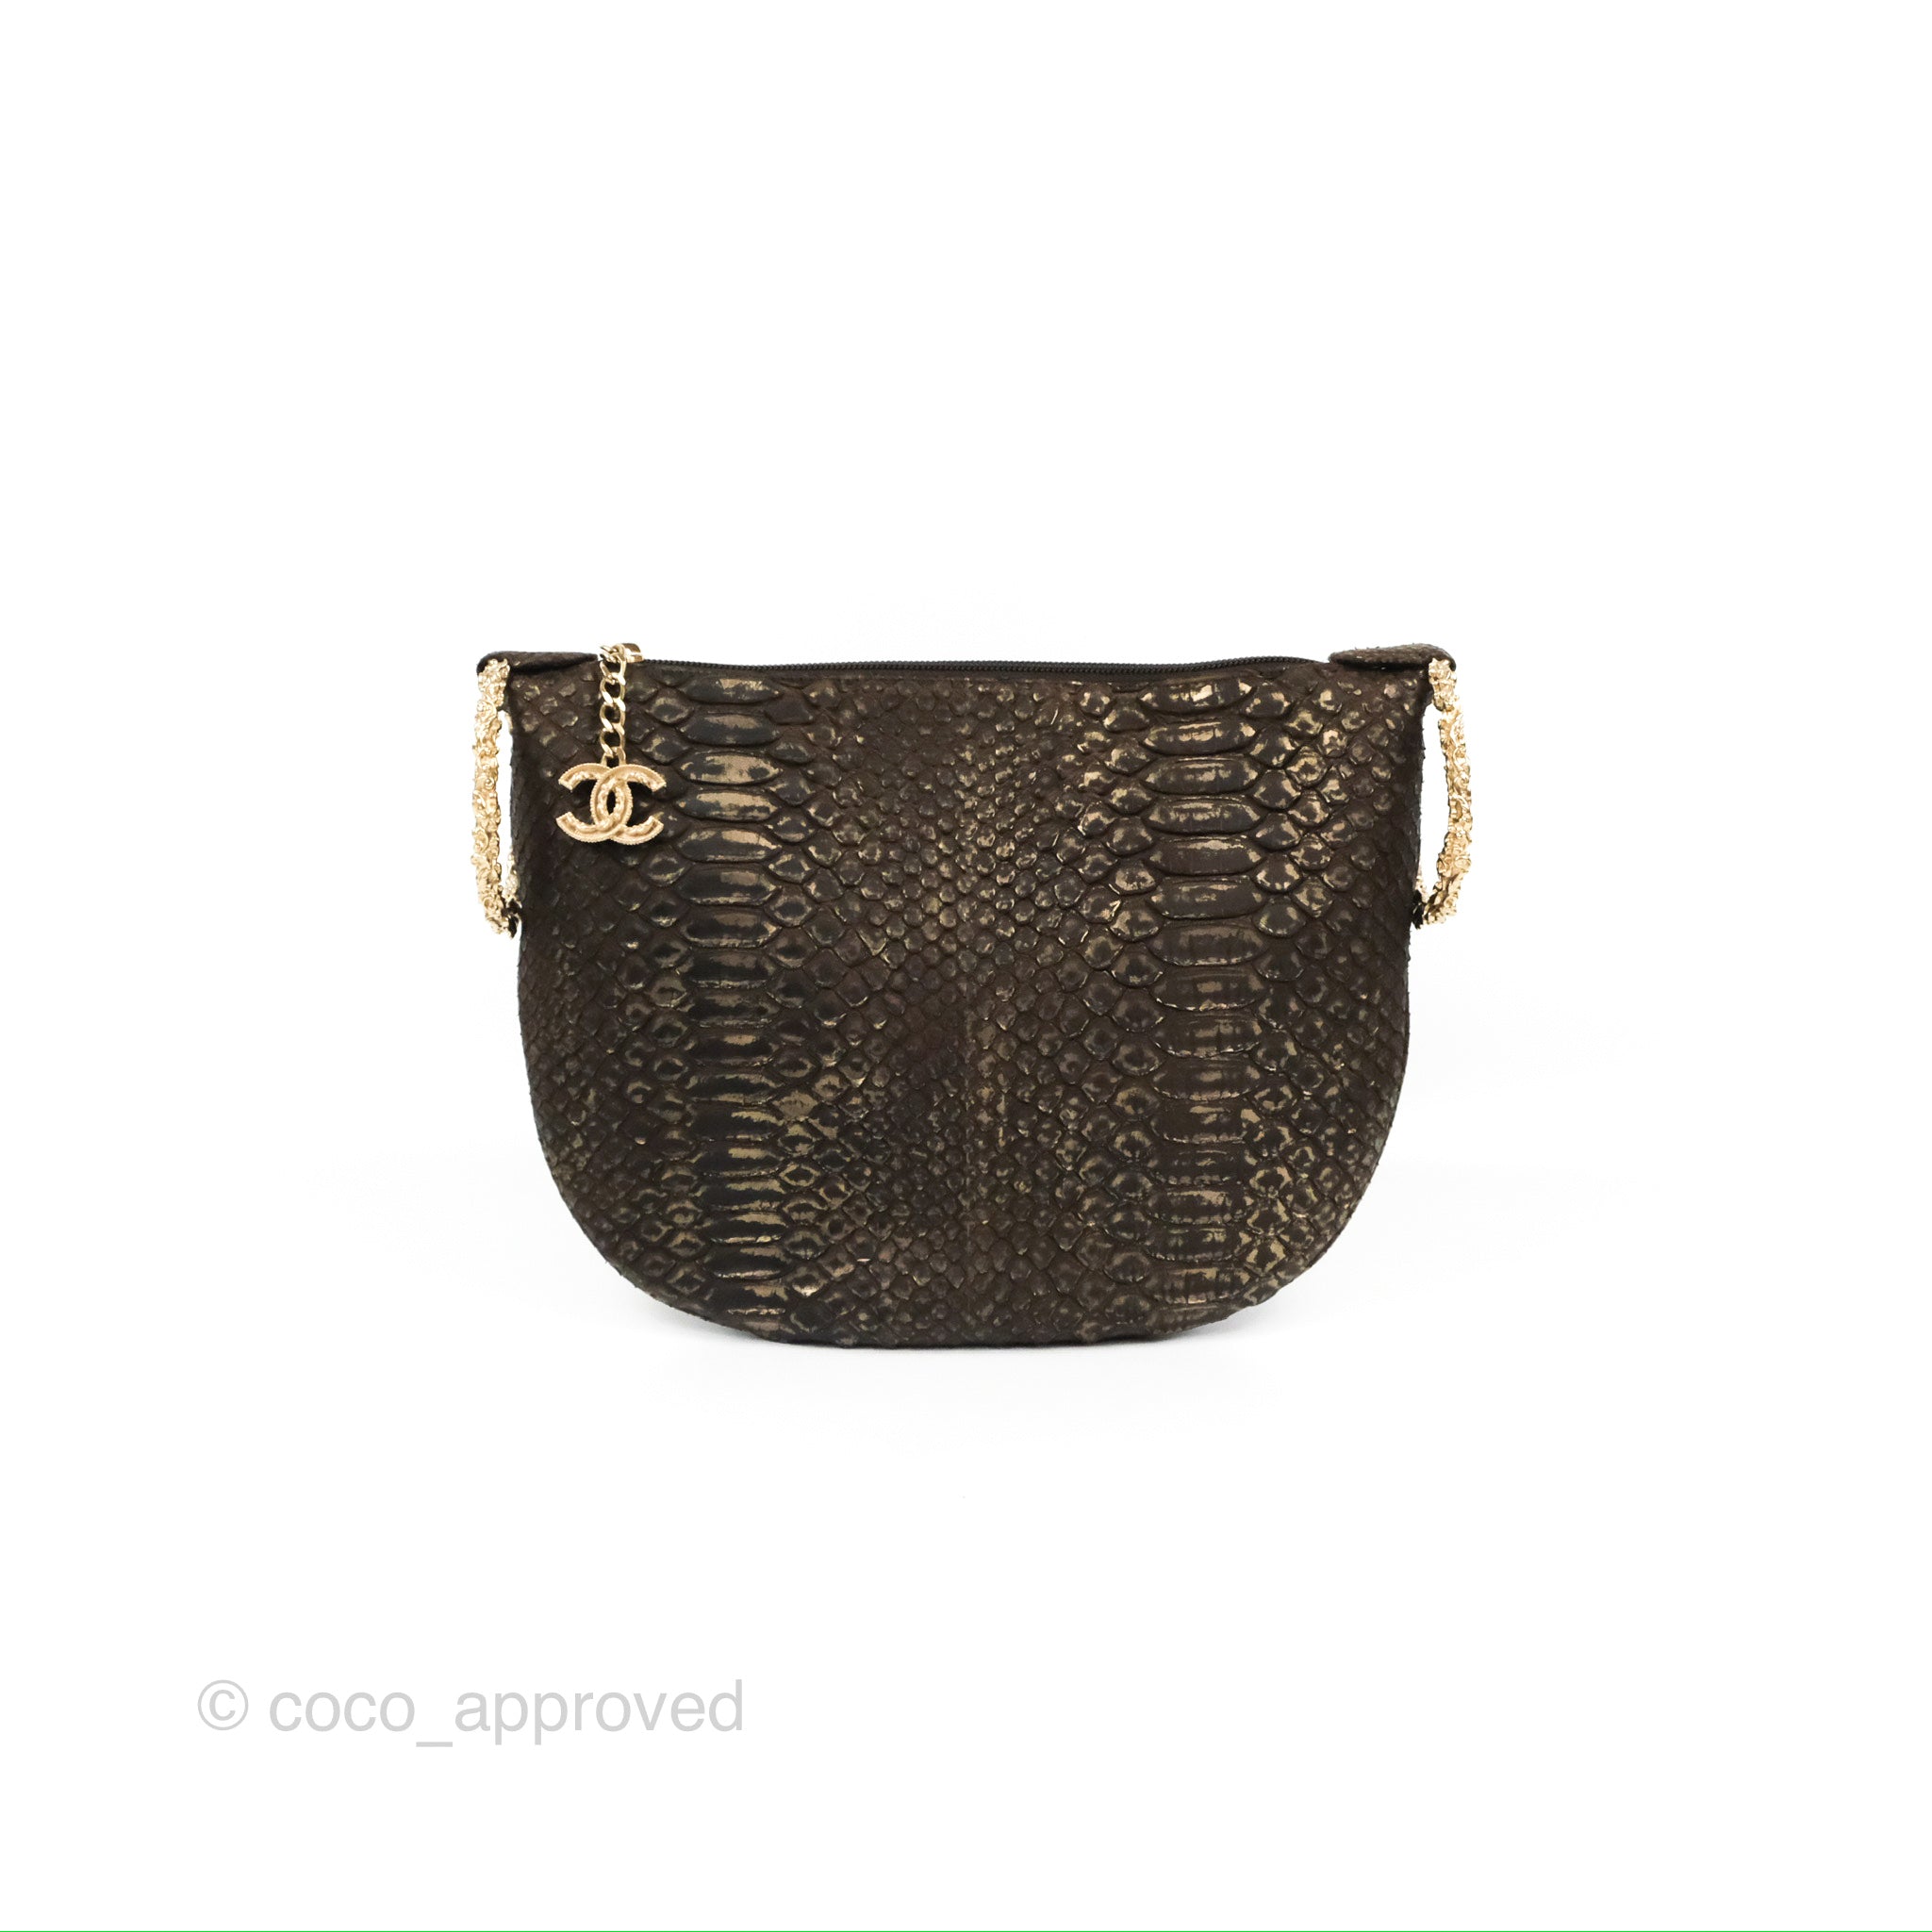 CHANEL Python Fortune Cookie Clutch Light Gold 101842